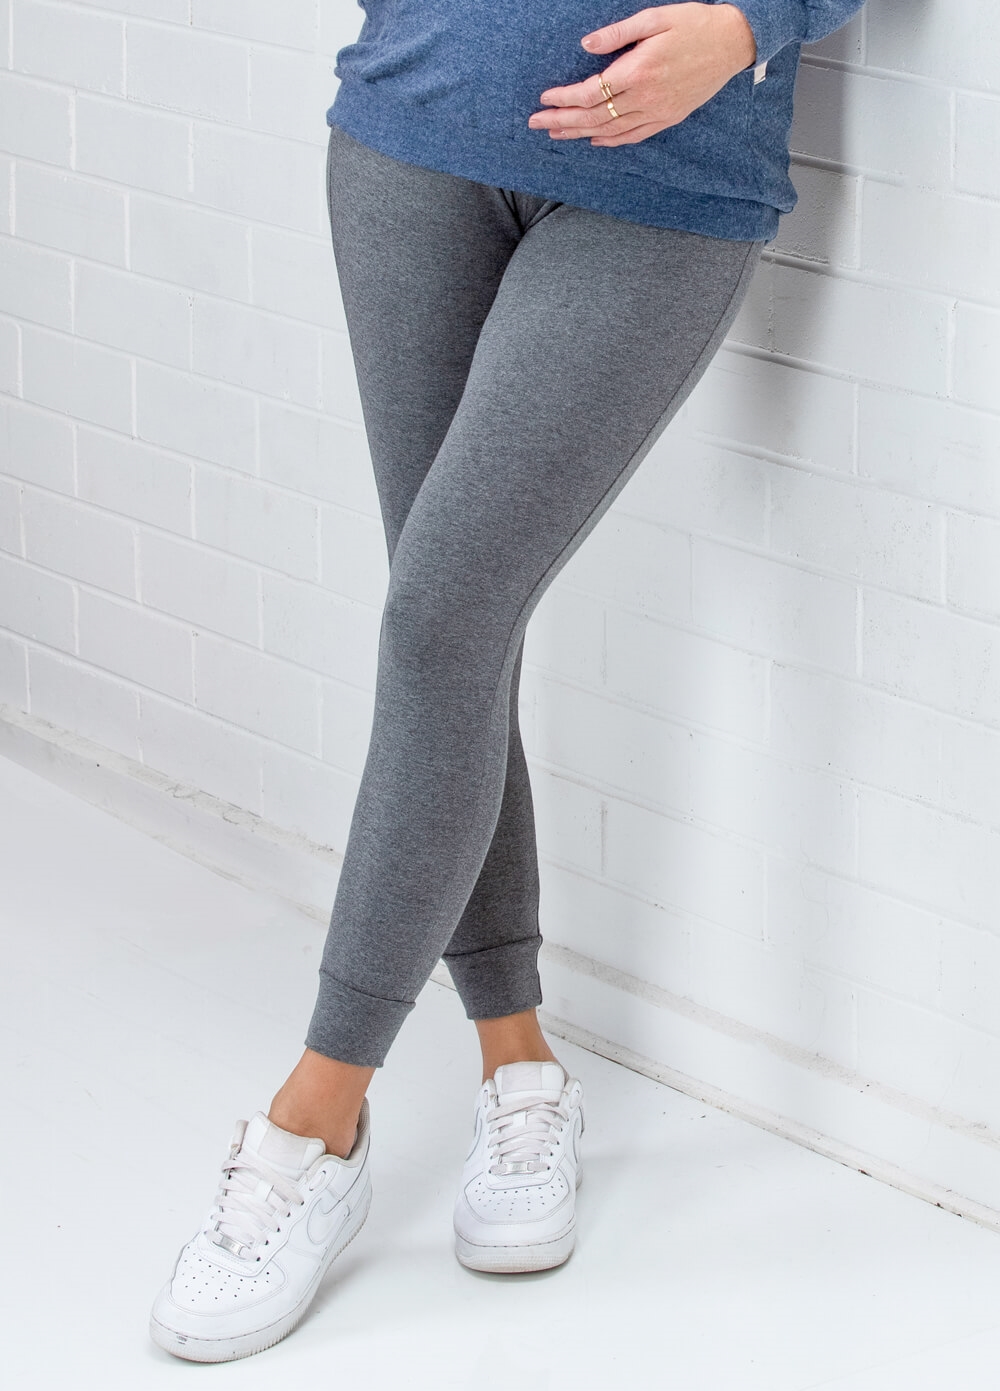 Lait & Co - Ninette Maternity Jogger Pants in Grey | Queen Bee